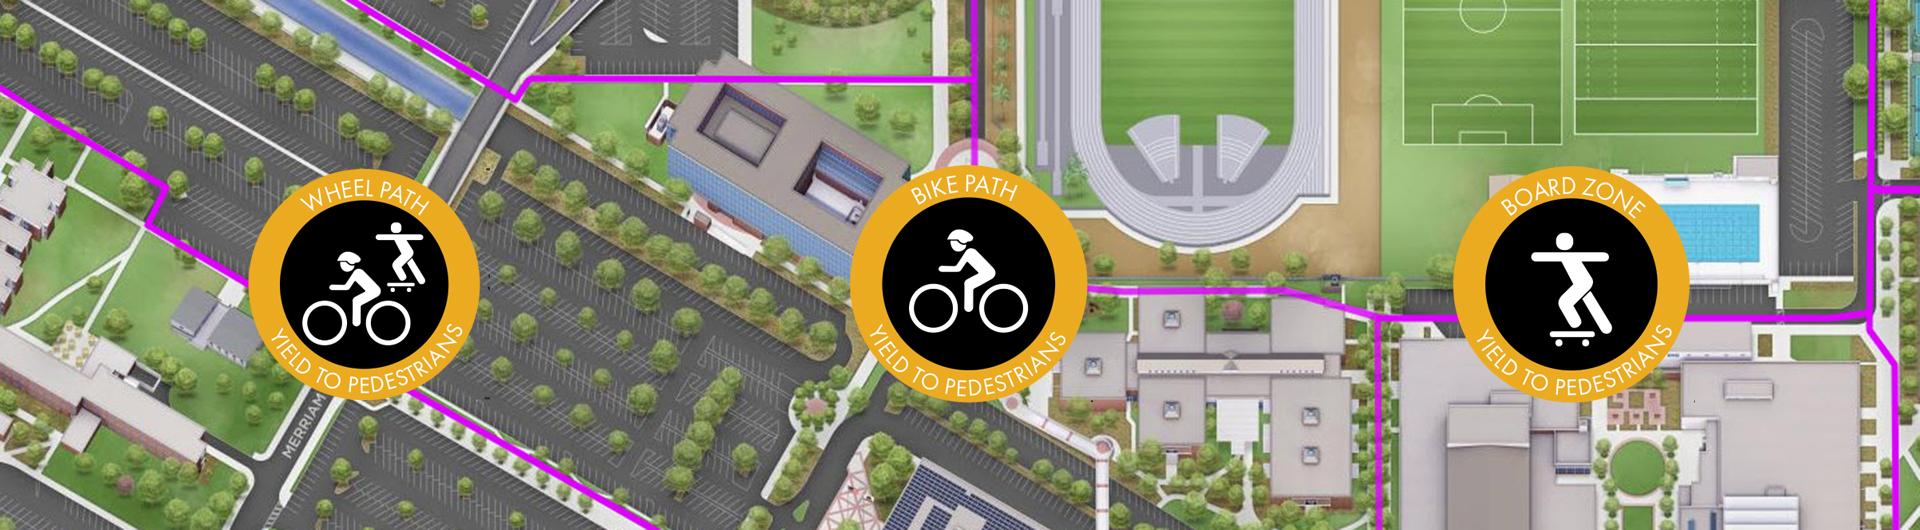 Campus Wheel Paths and decals